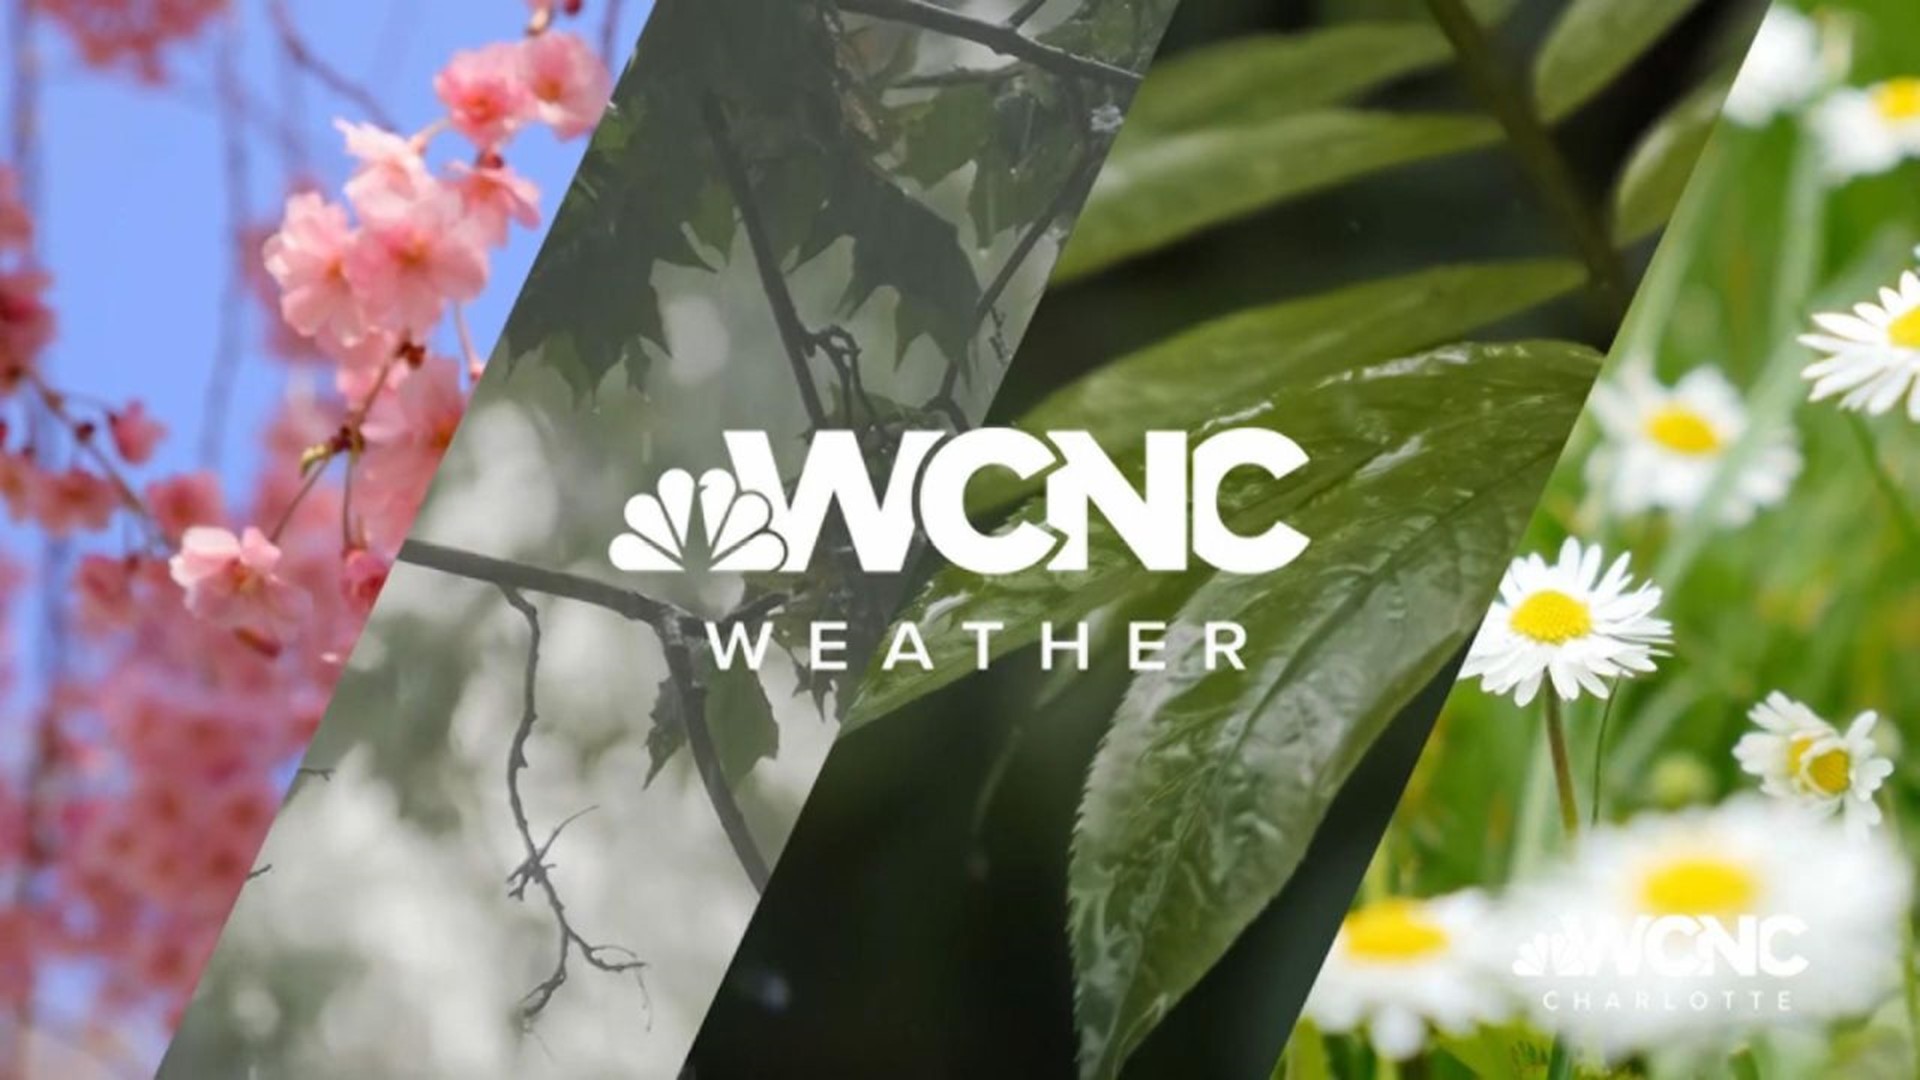 Experience the difference with Brad Panovich and the WCNC Charlotte Weather Team. They will keep you informed when it's important to stay weather aware.